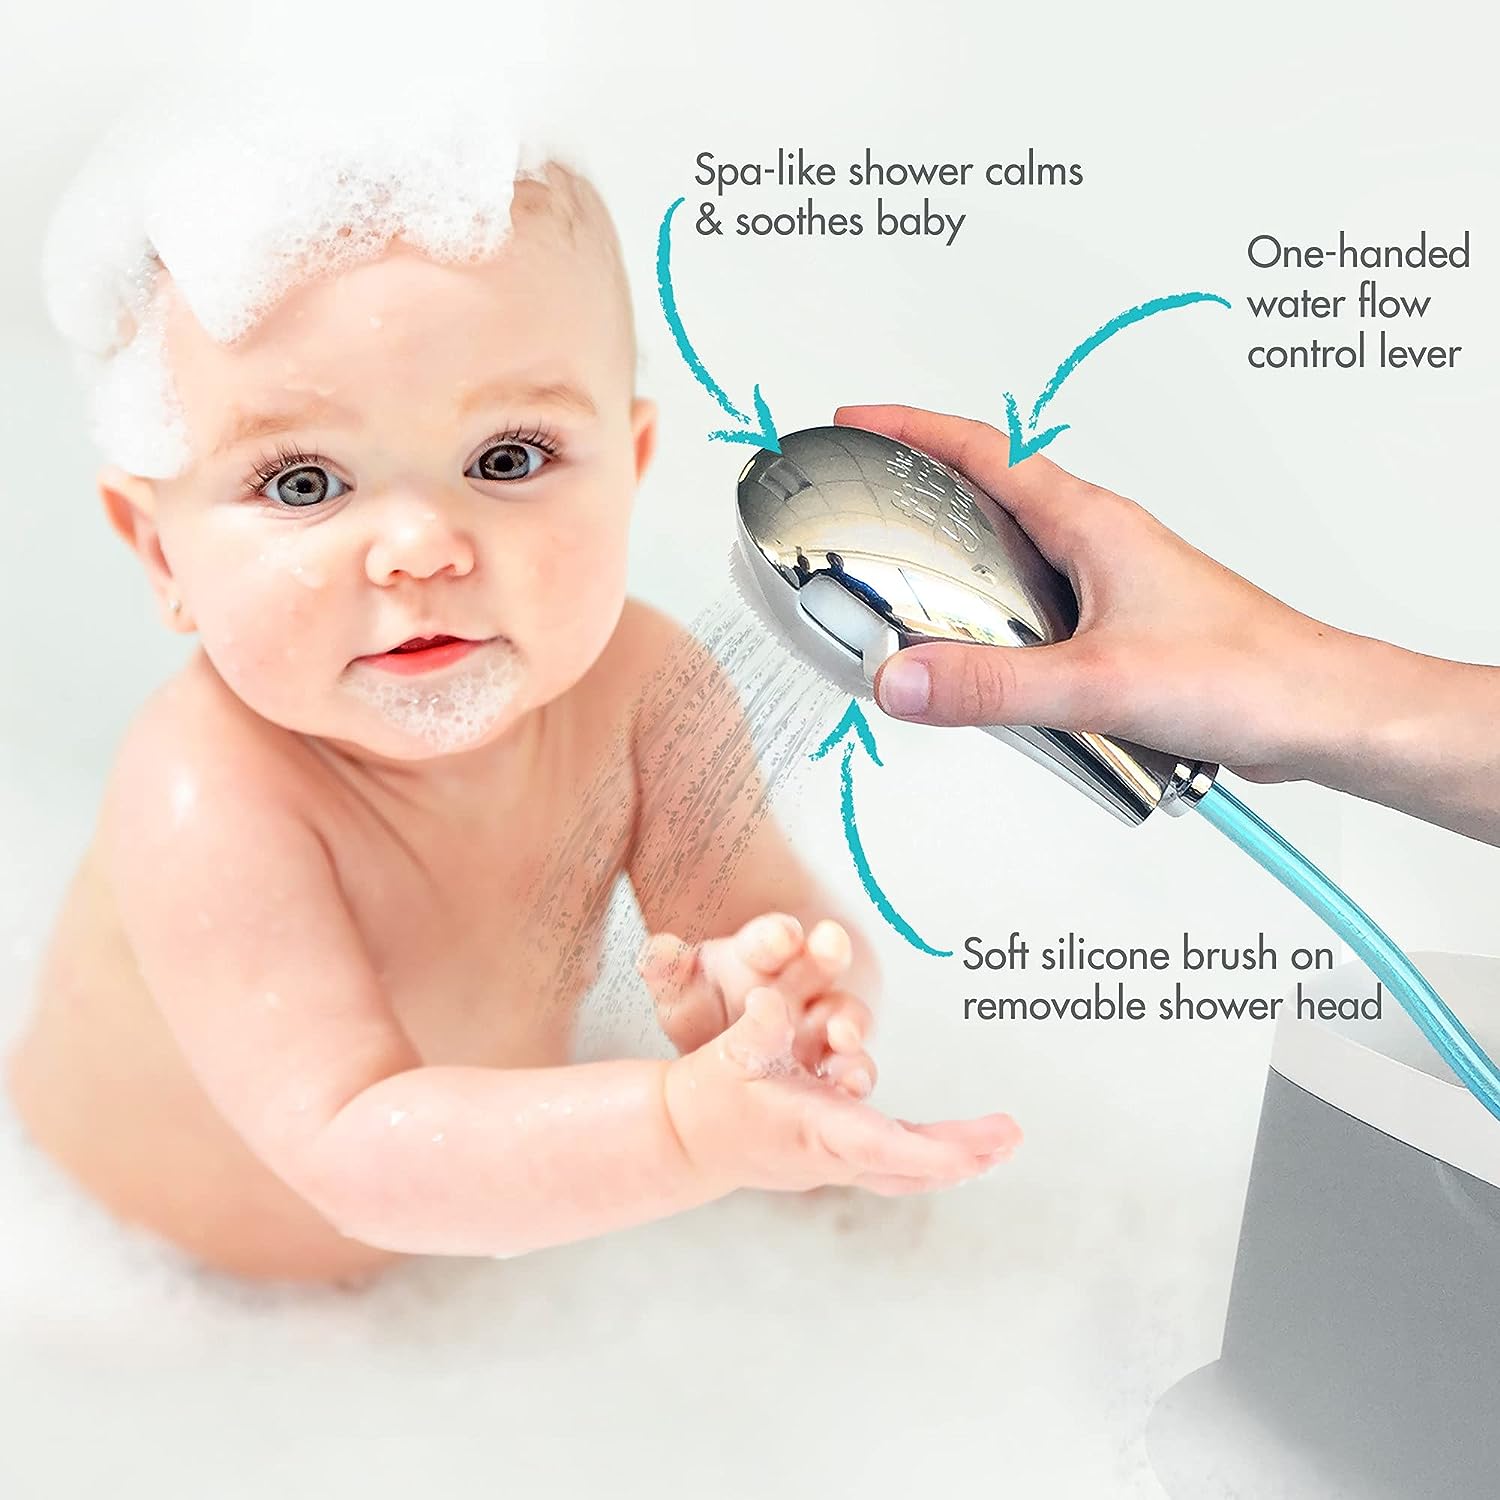 The First Years Rain Shower Baby Bathtub — Baby Spa for Newborn to Toddler  — Includes Convertible Bathtub and Sling with Soothing Spray — Baby Bath